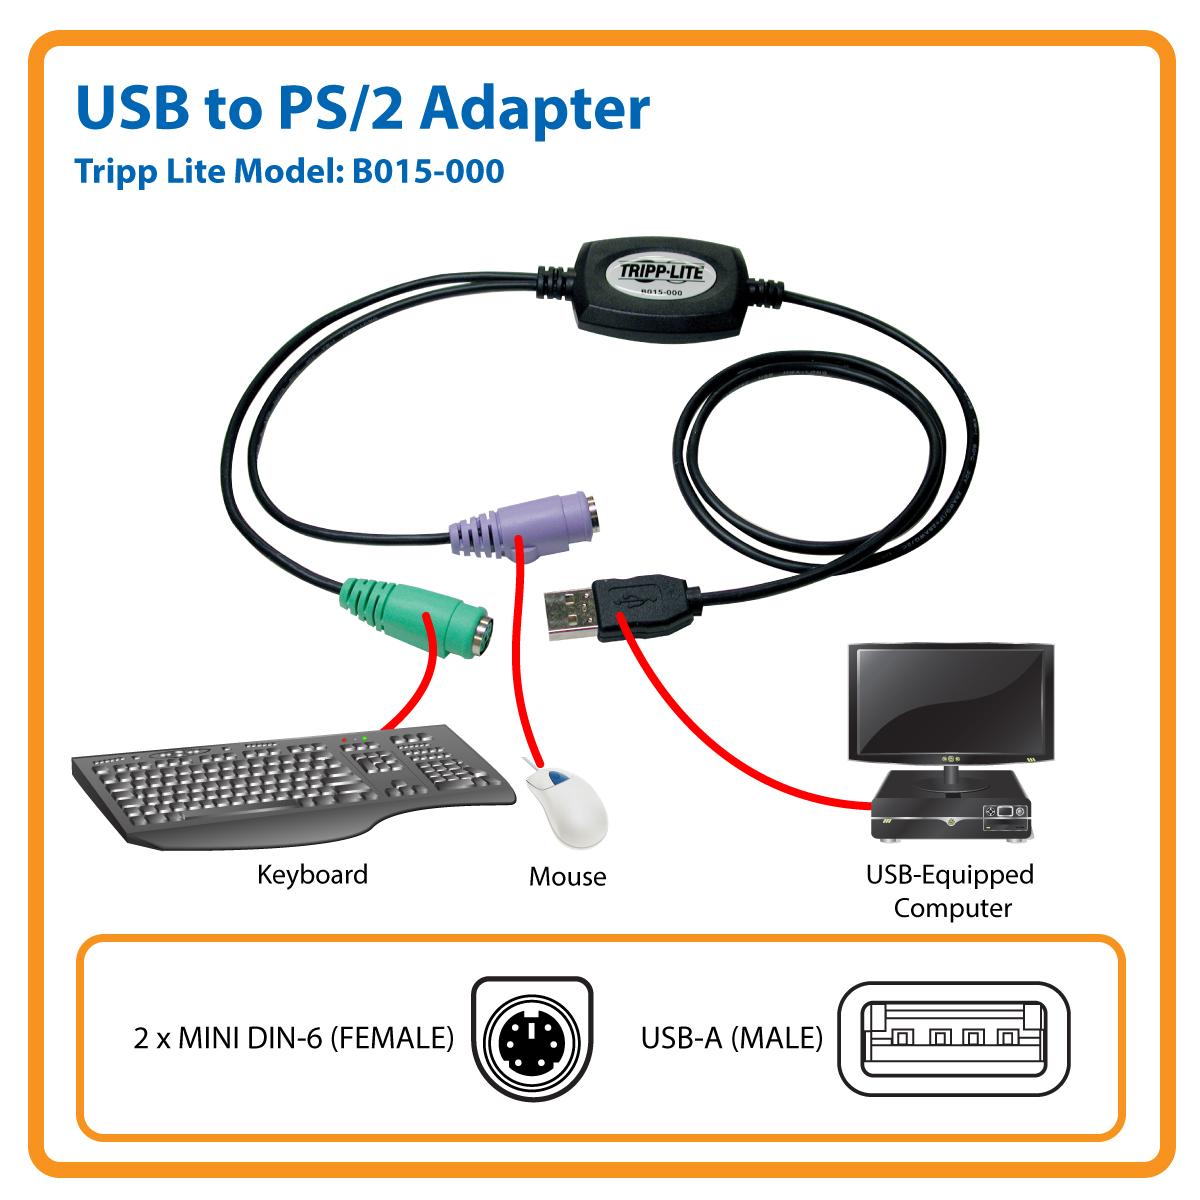 ps2 to usb adapter diy